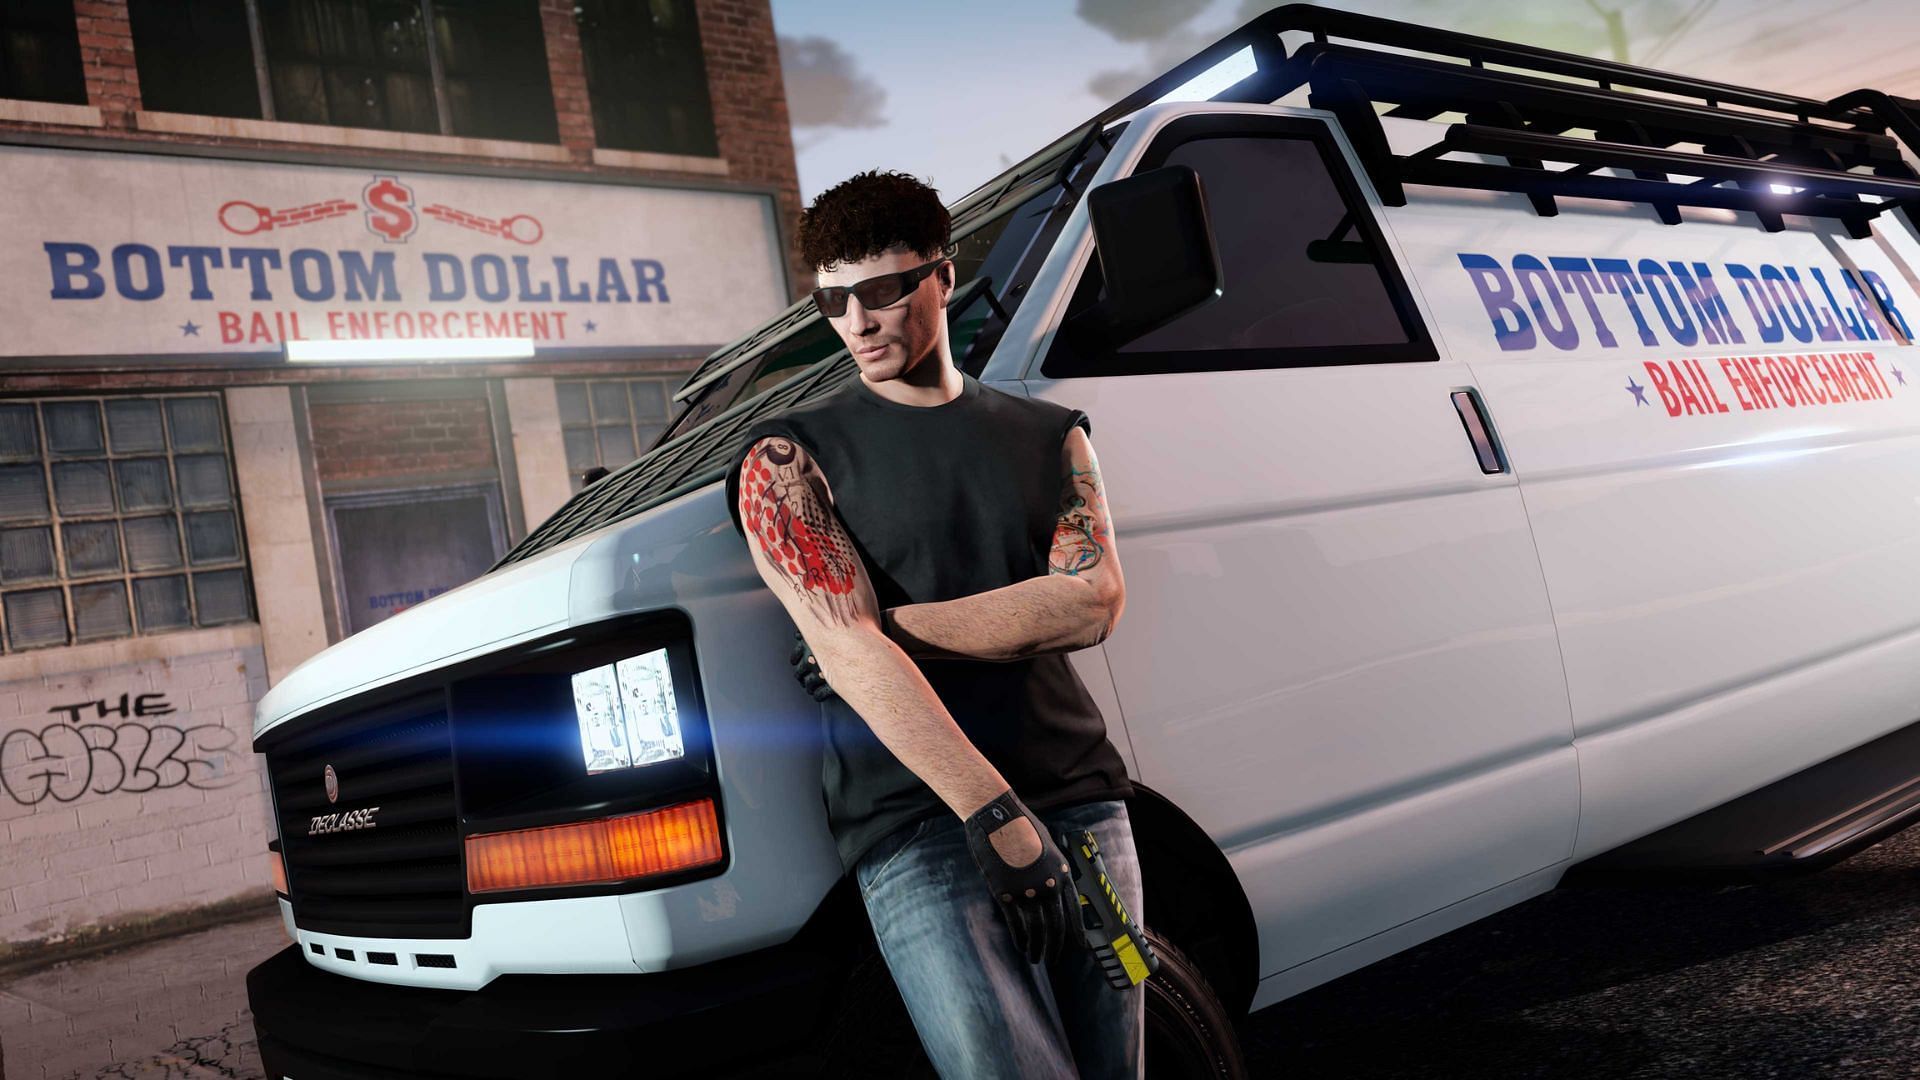 The van is likely associated with the new property (Image via Rockstar Games)